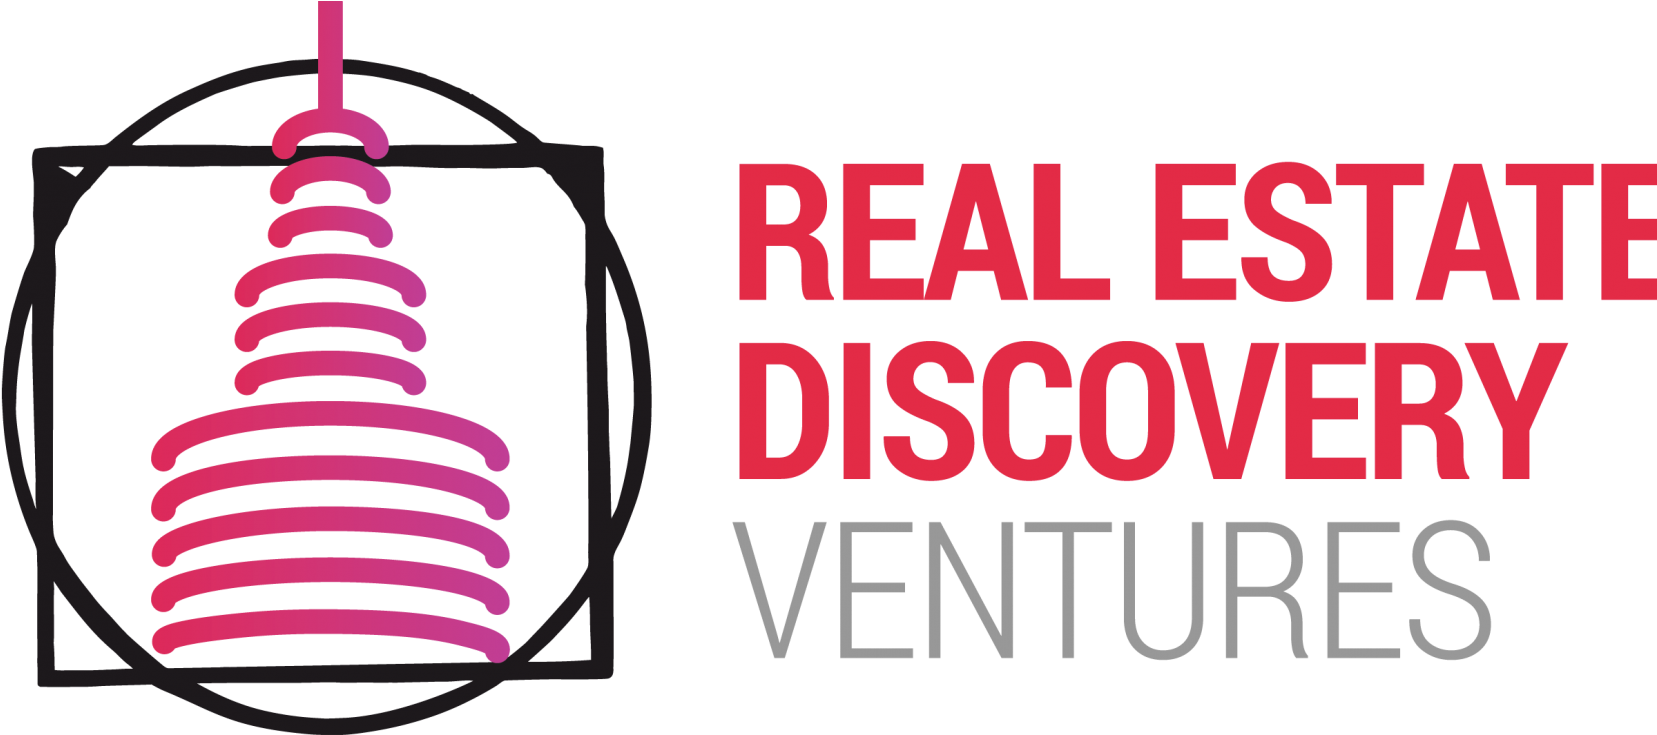 Social Discovery Ventures (1680x745)